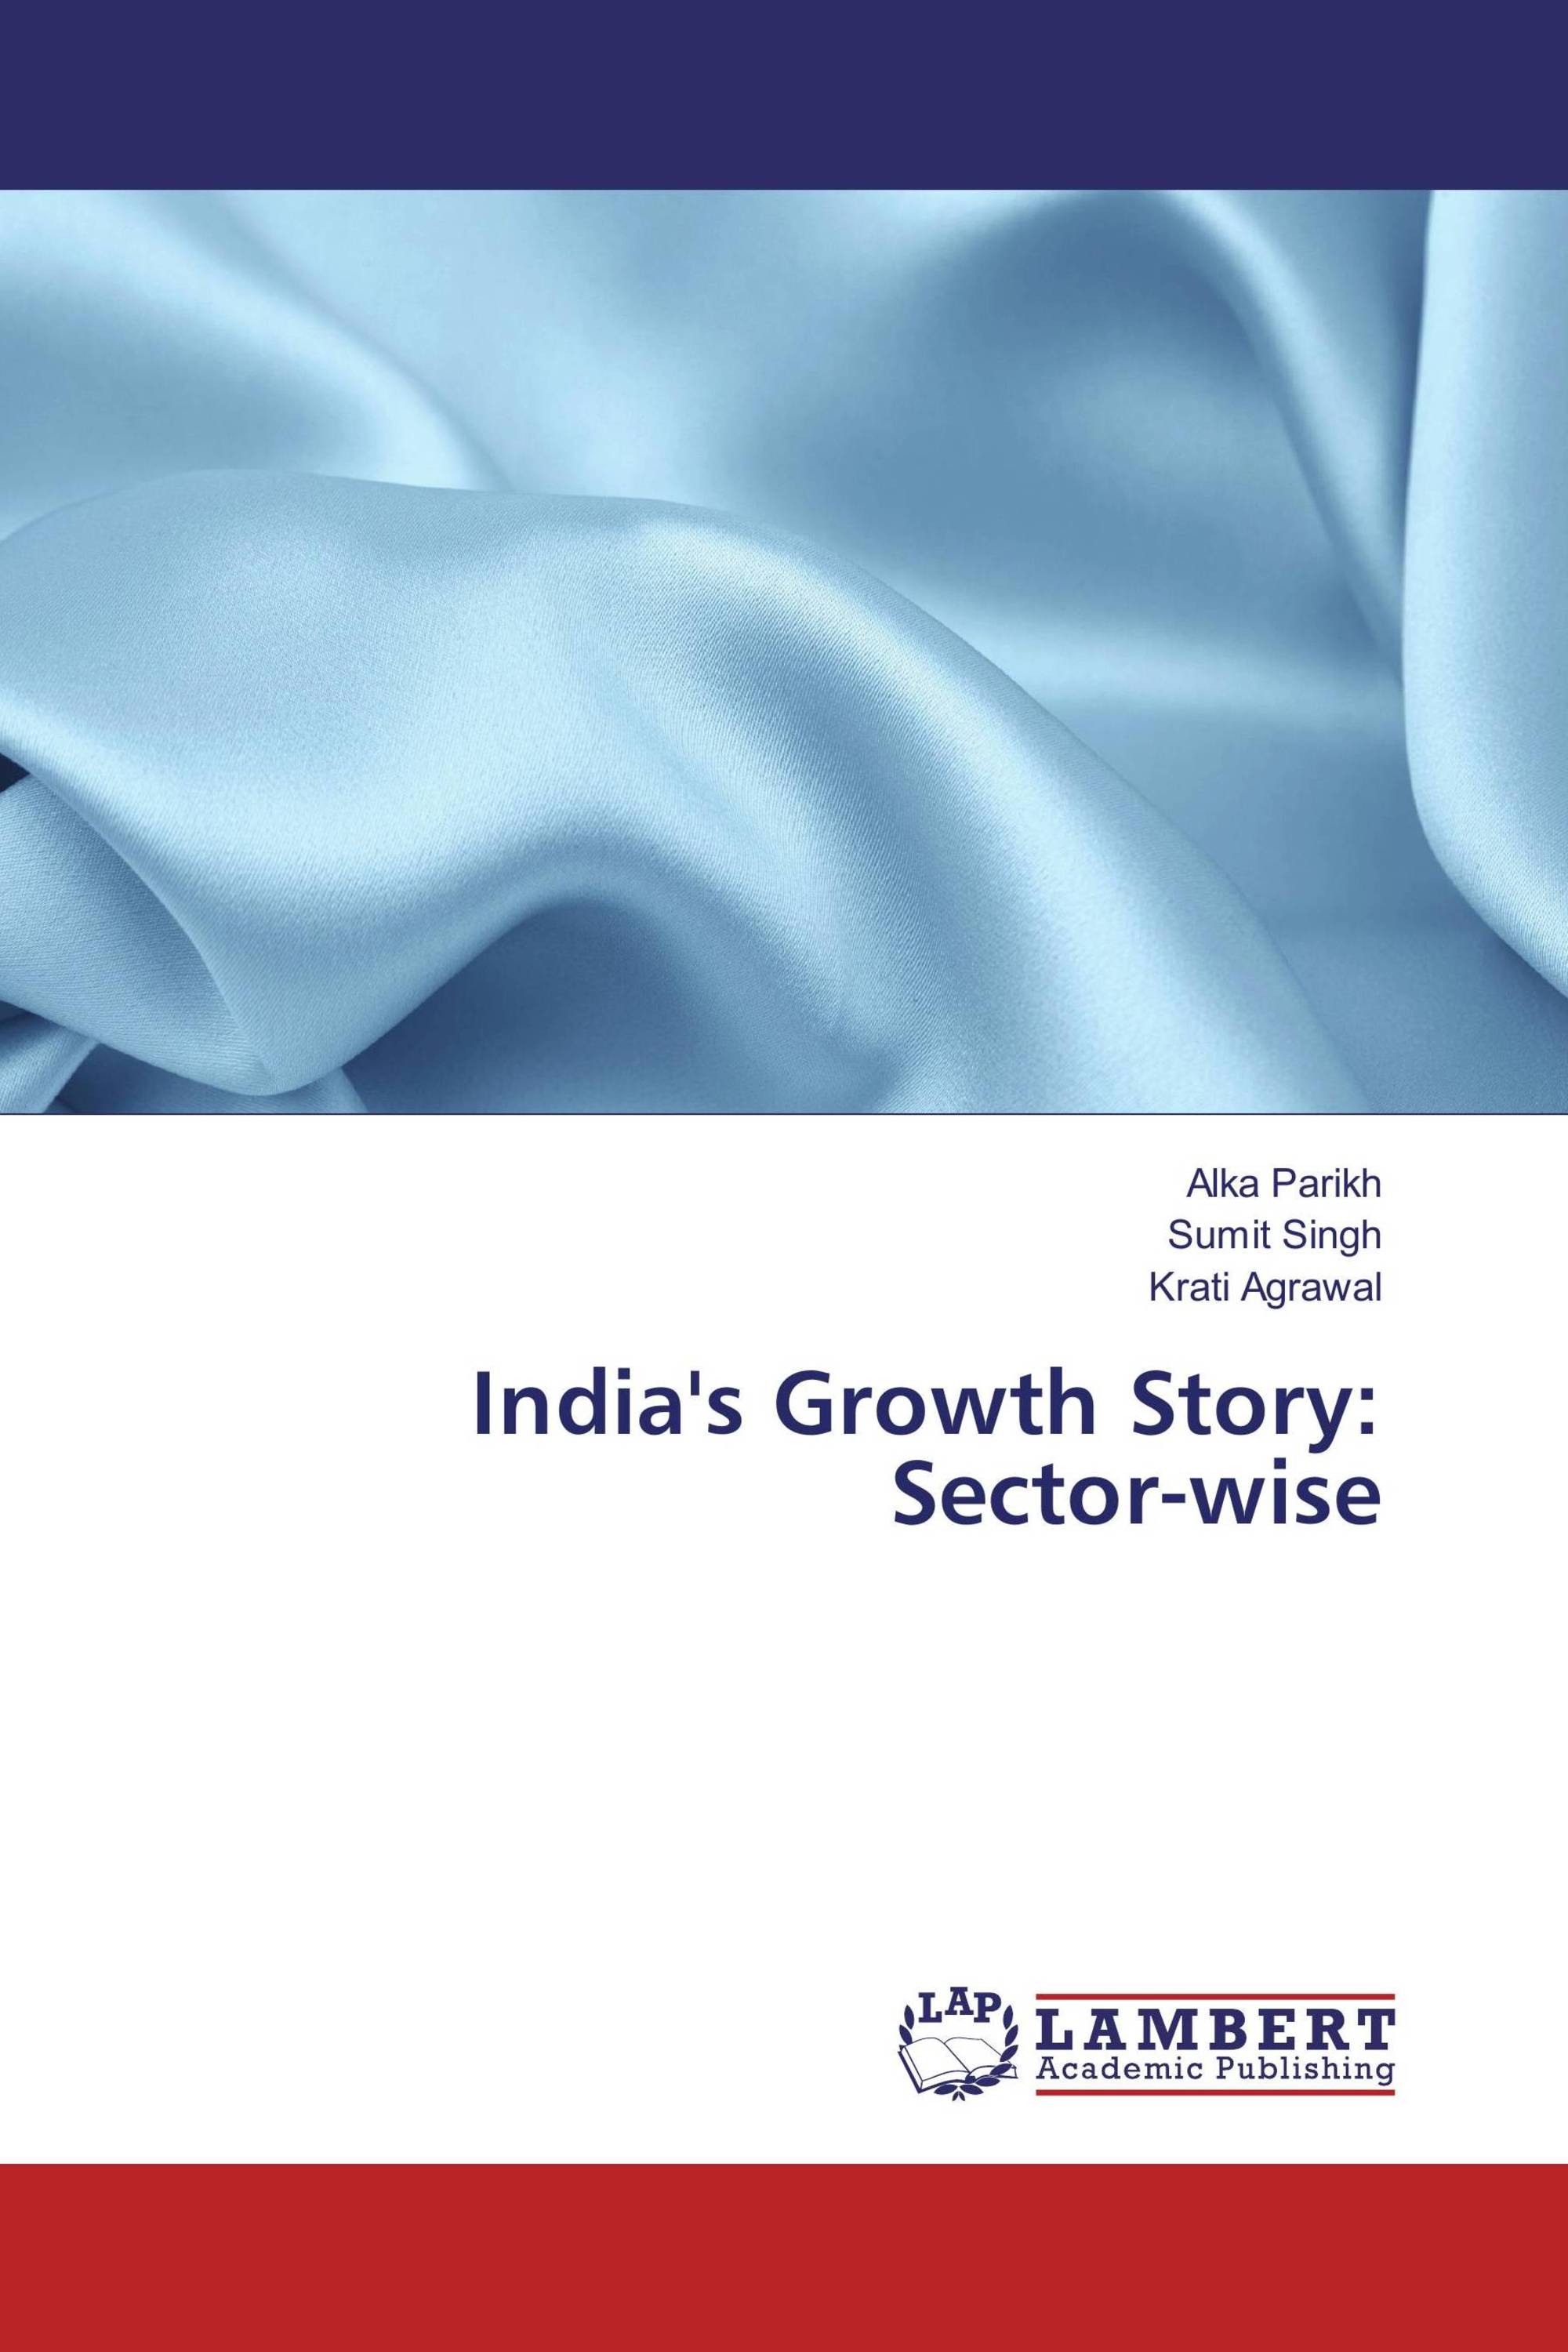 India's Growth Story: Sector-wise